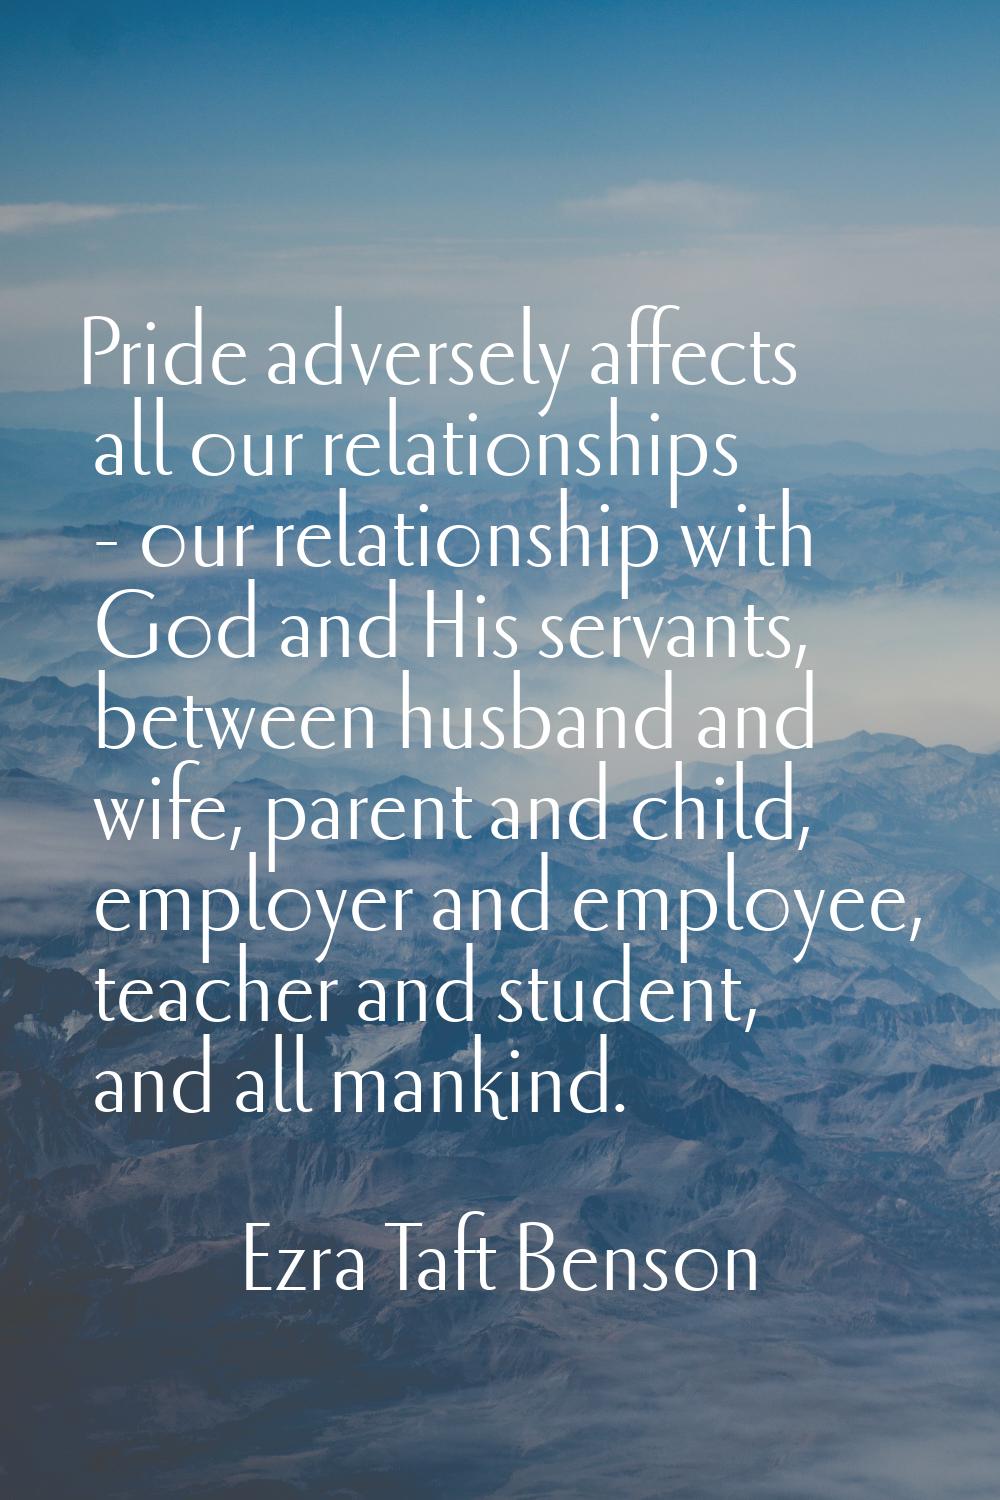 Pride adversely affects all our relationships - our relationship with God and His servants, between